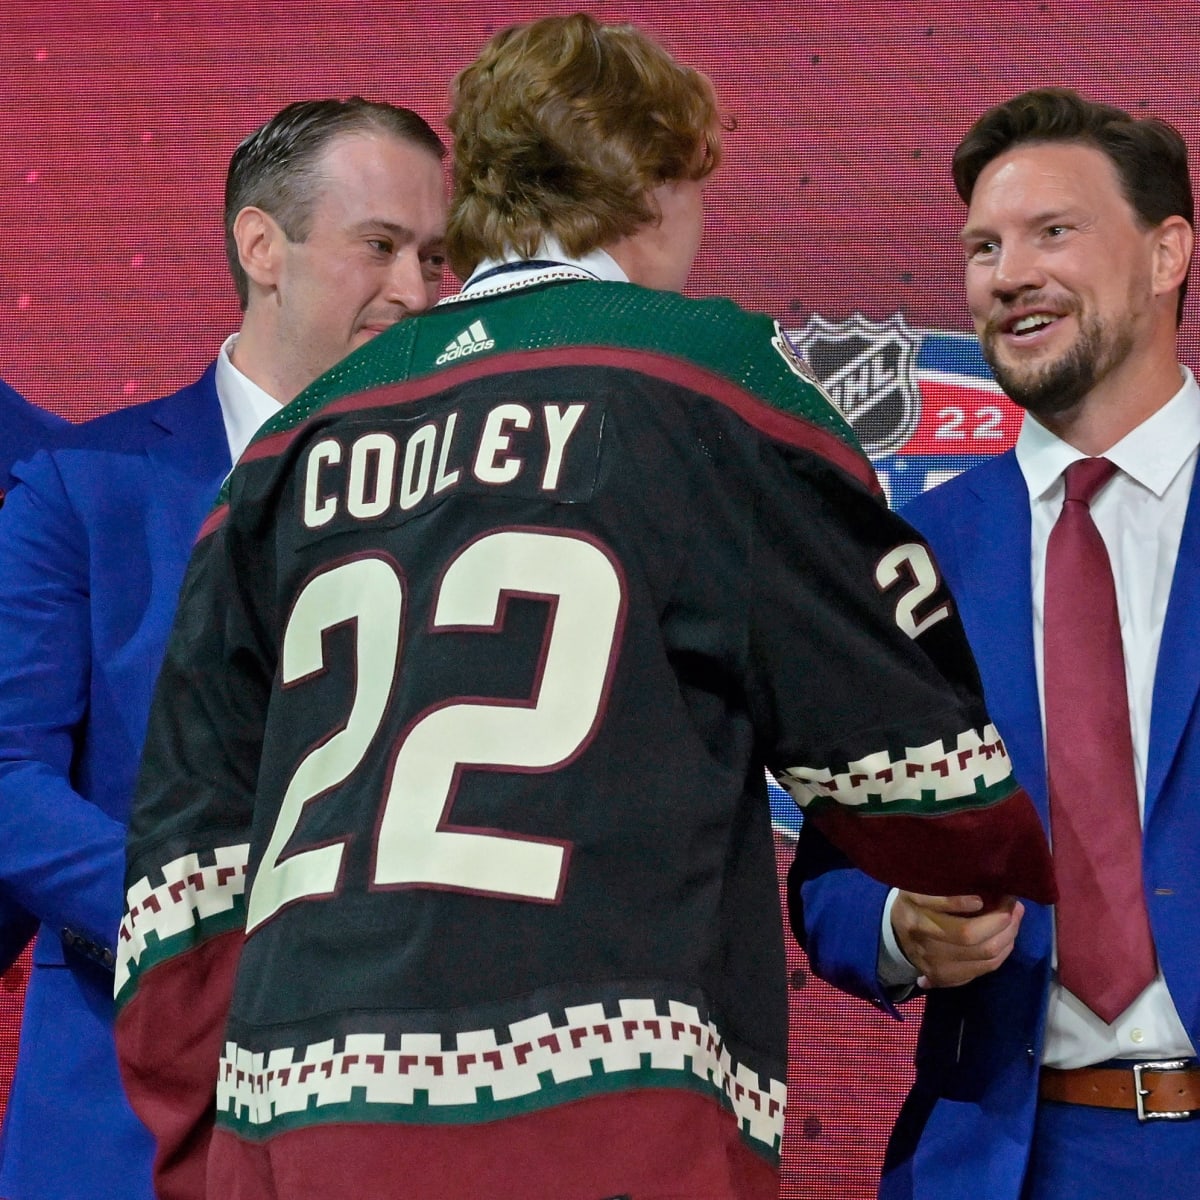 The New York Rangers considered some truly silly 90s jersey